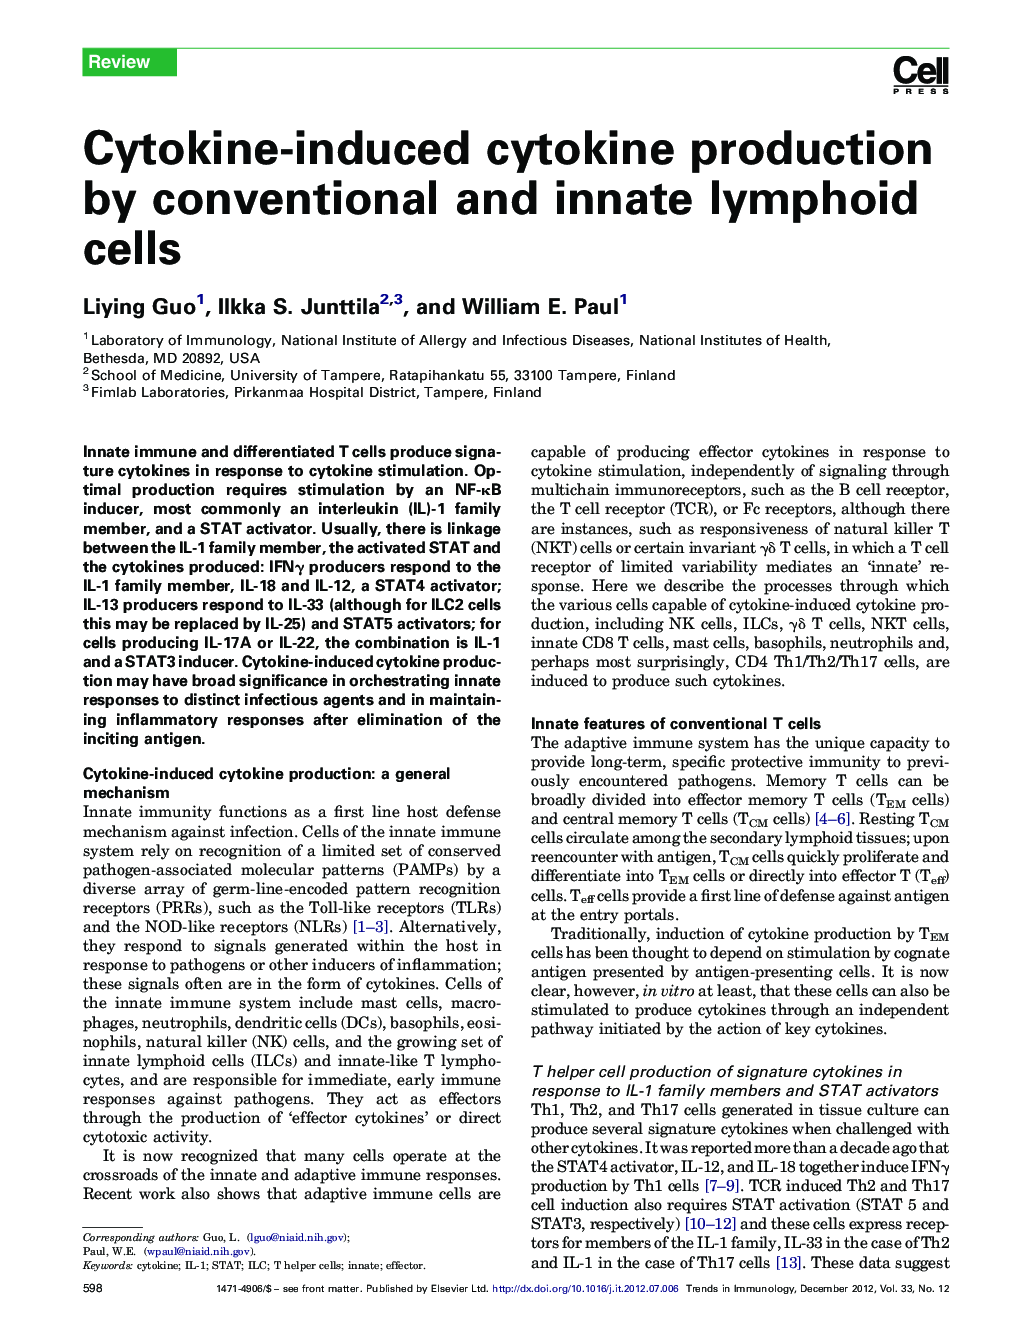 Cytokine-induced cytokine production by conventional and innate lymphoid cells